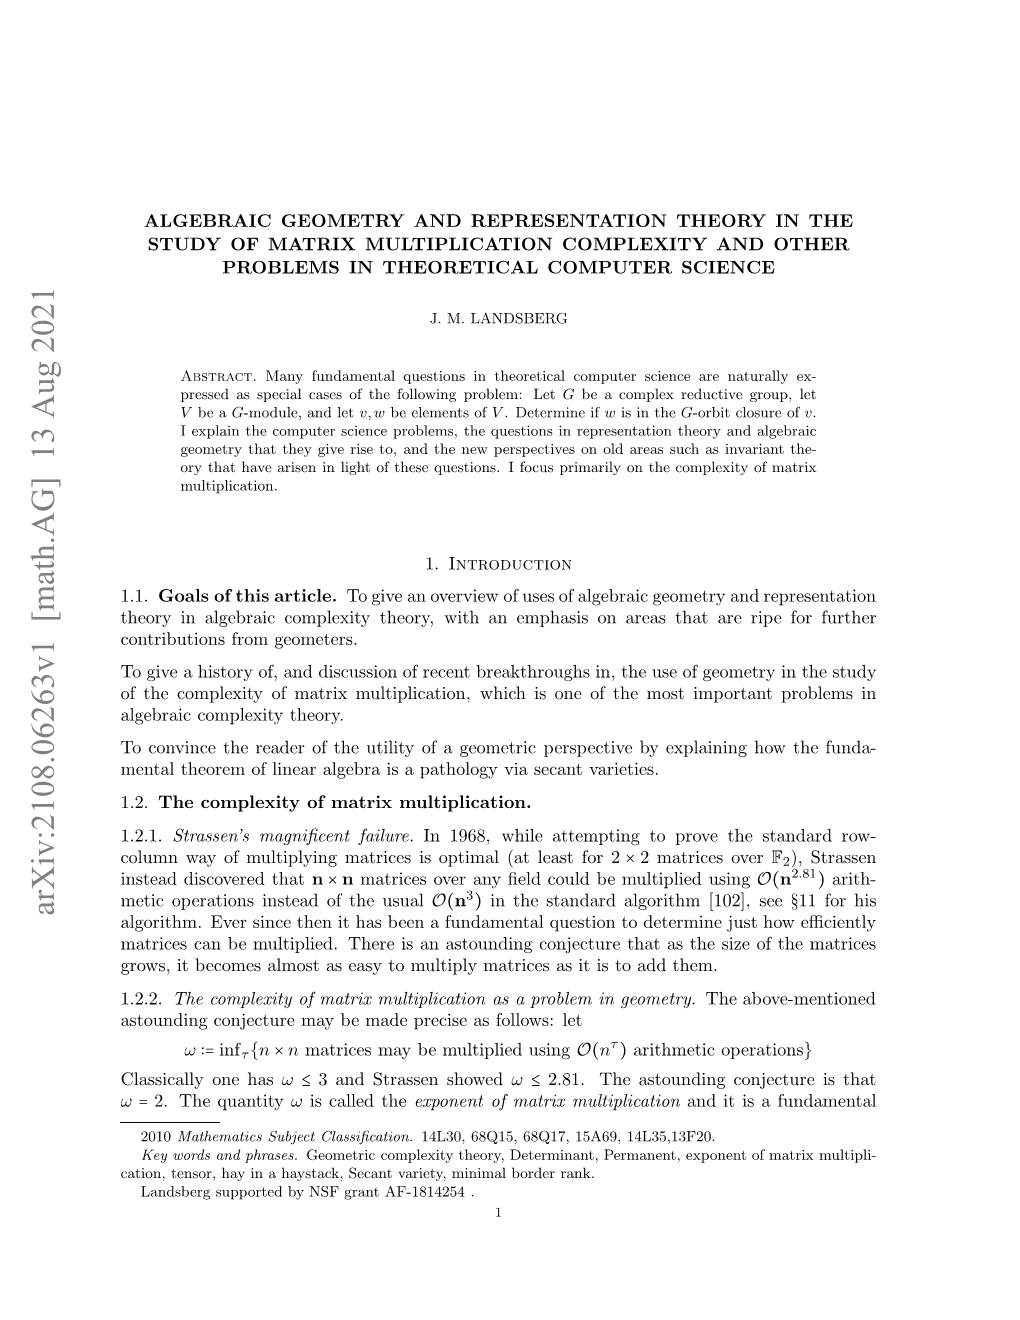 Algebraic Geometry and Representation Theory in the Study